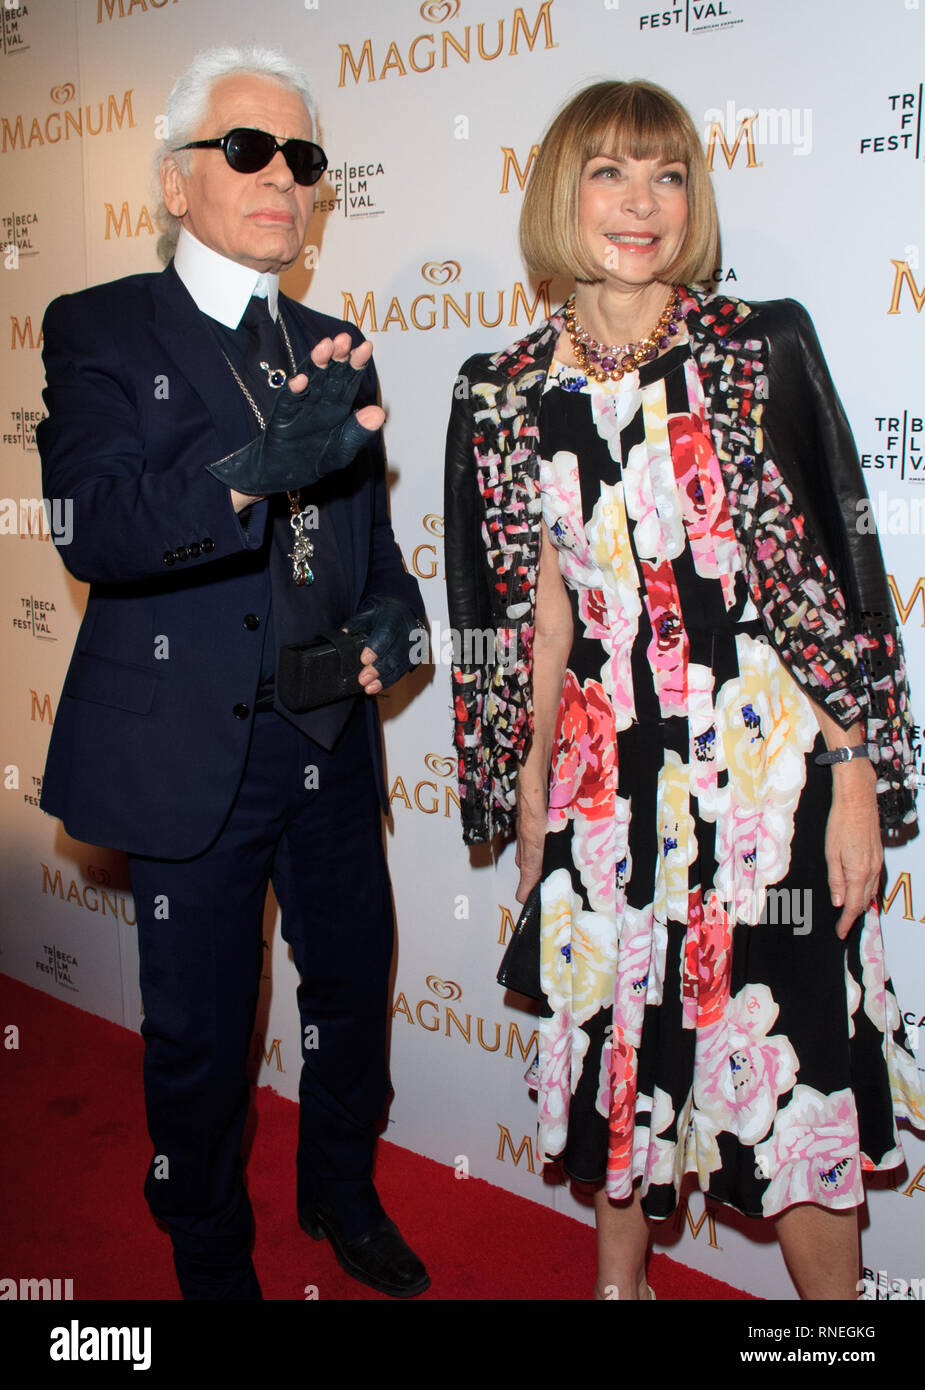 American Vogue Editor-in-Chief Anna Wintour and Designer Karl Lagerfeld  attend the debut of Karl Lagerfeld & Rachel Bilson's original film series  inspired by Magnum Ice Cream during the 10th annual Tribeca Film